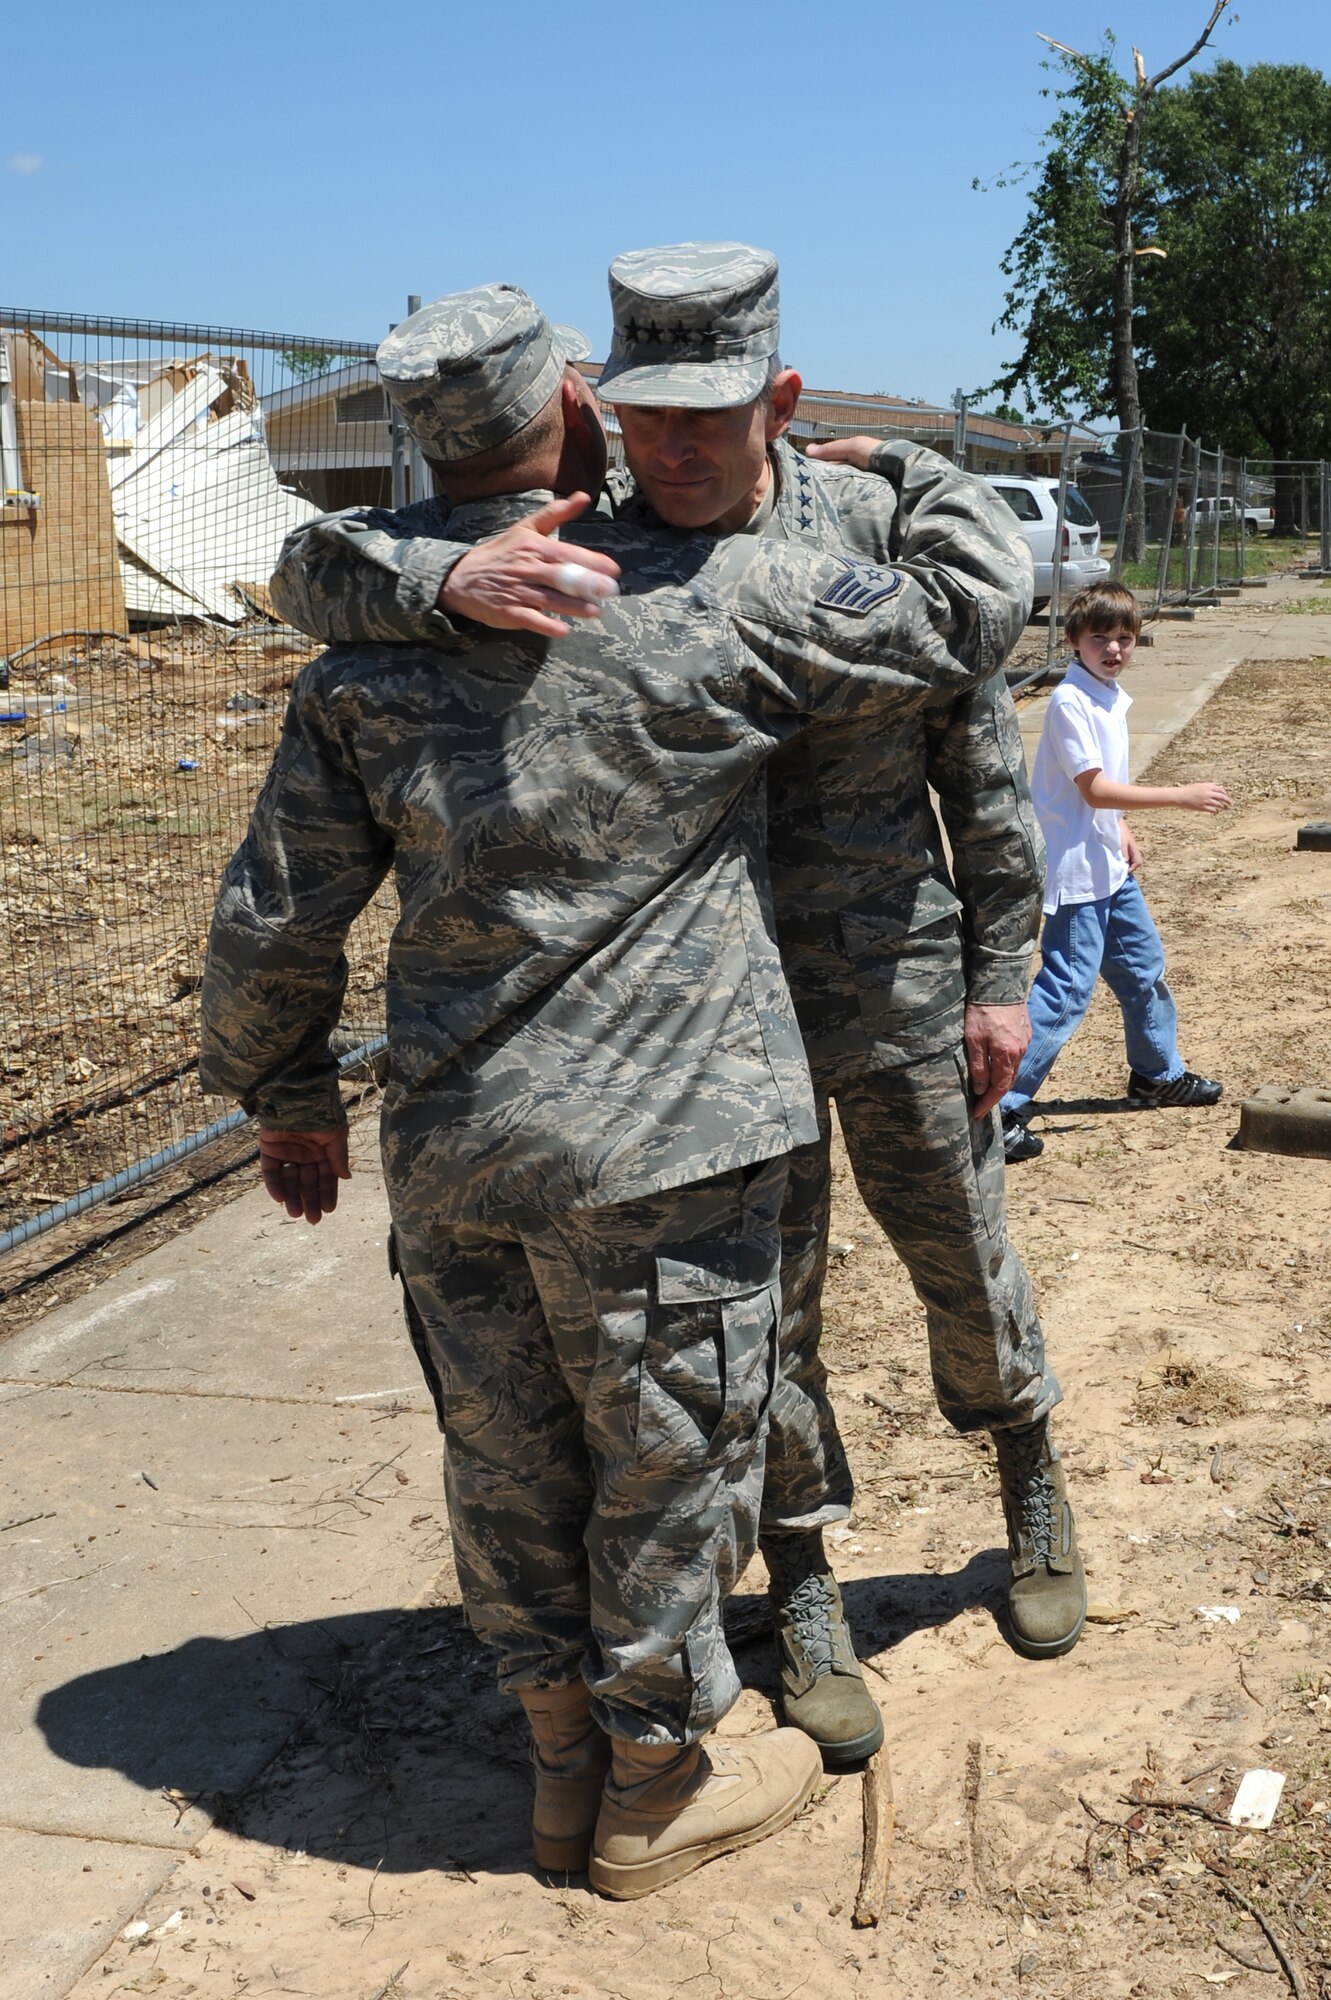 Air Force Chief of Staff Gen. Norton Schwartz hugs Staff Sgt. Eric Bramblett outside his base house May 4, 2011, at Little Rock Air Force Base, Ark., during a base visit. Sergeant Bramblett, a 19th Logistics Readiness Squadron vehicle operator and dispatcher, returned from a deployment to Iraq after his house was destroyed by the tornado that hit Little Rock AFB April 25, 2011. (U.S. Air Force photo/Airman 1st Class Rusty Frank)